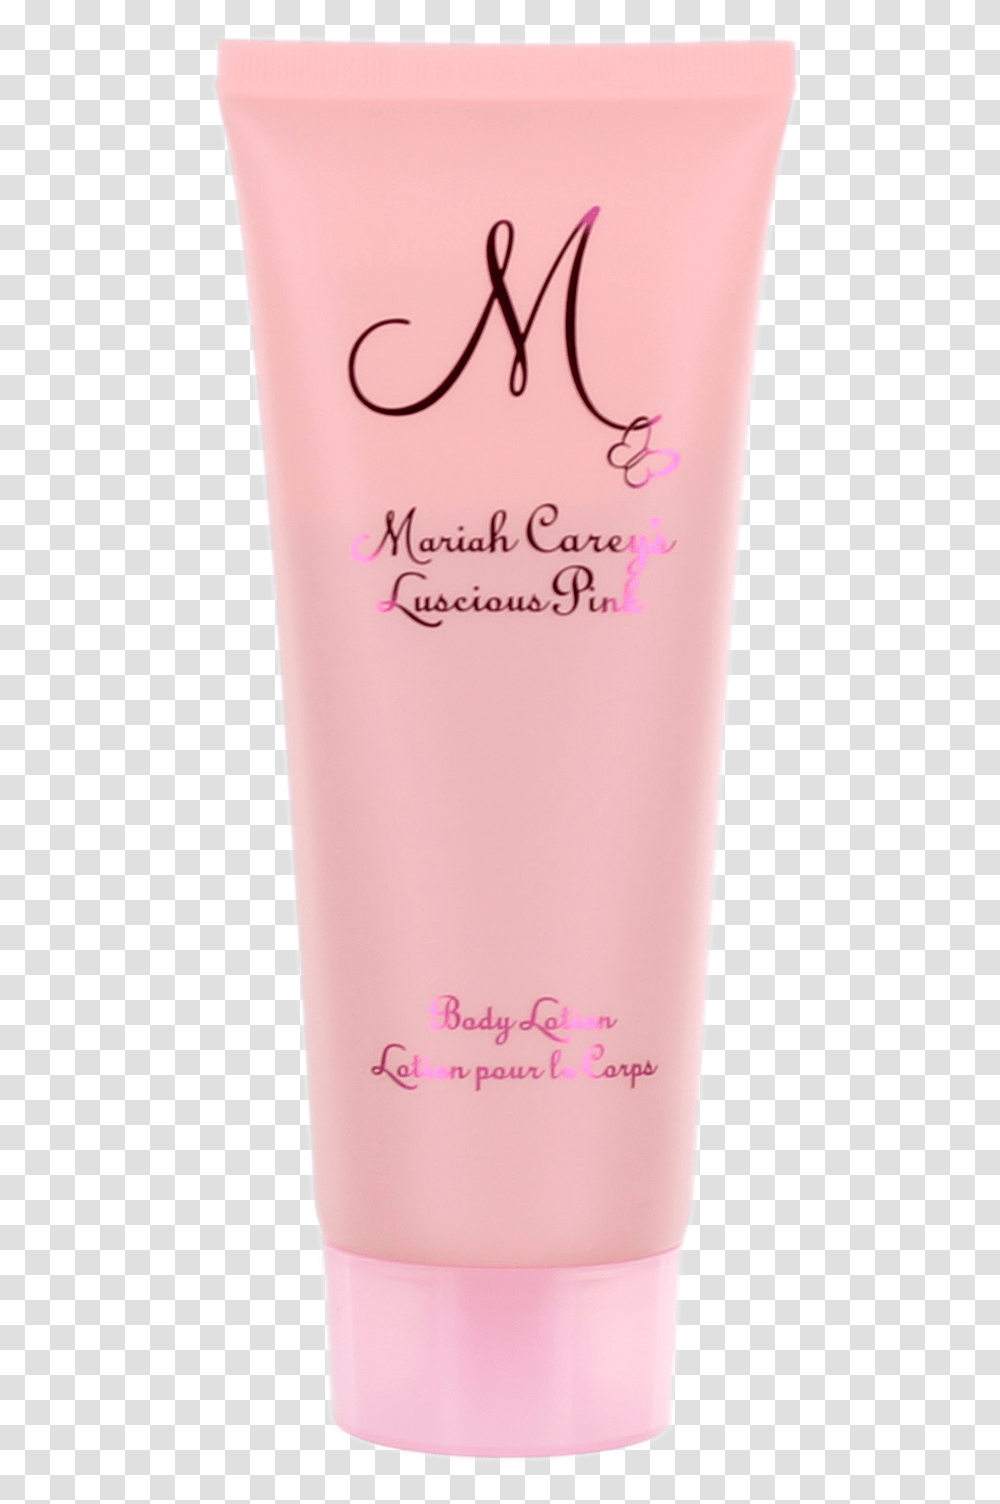 Lucious Pink By Mariah Carey For Women Body Lotion Lotion, Bottle, Cosmetics, Purple, Aluminium Transparent Png